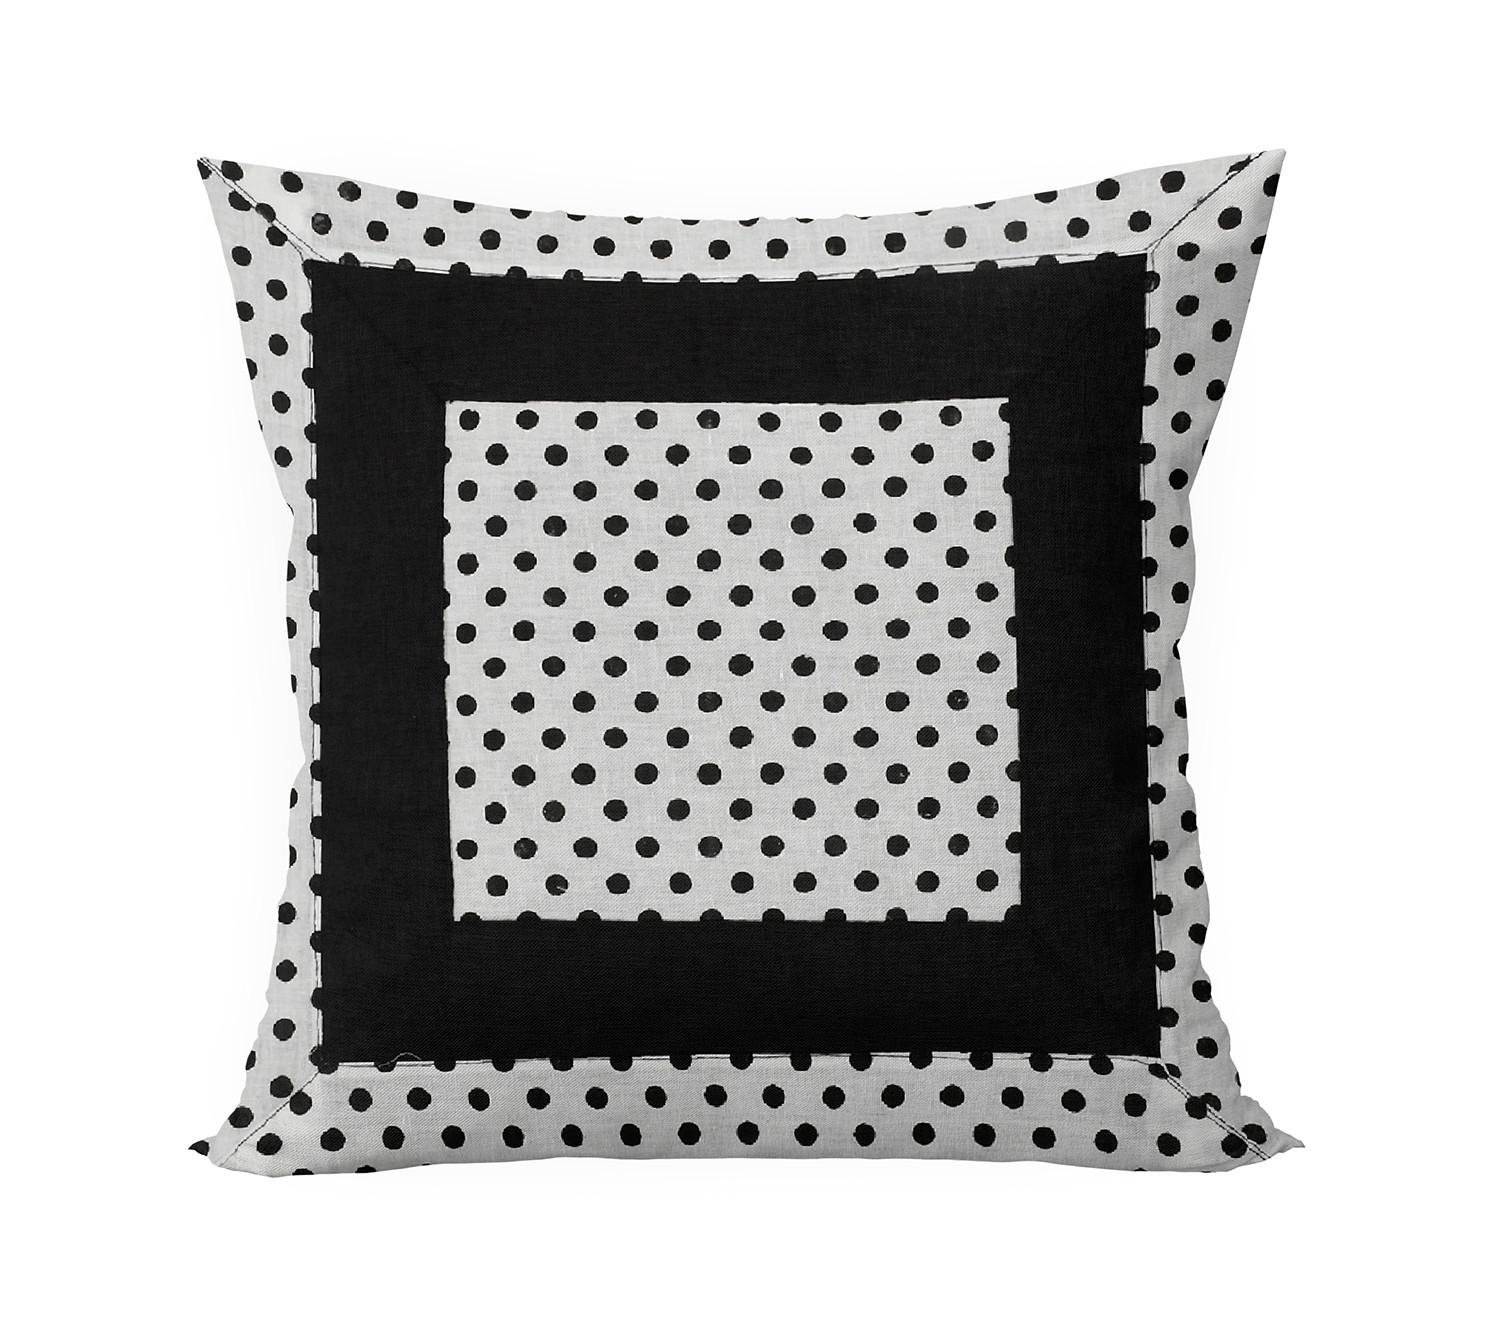 Kuber Industries Dot Print Soft Decorative Square Cushion Cover, Cushion Case For Sofa Couch Bed 16x16 Inch-(White)